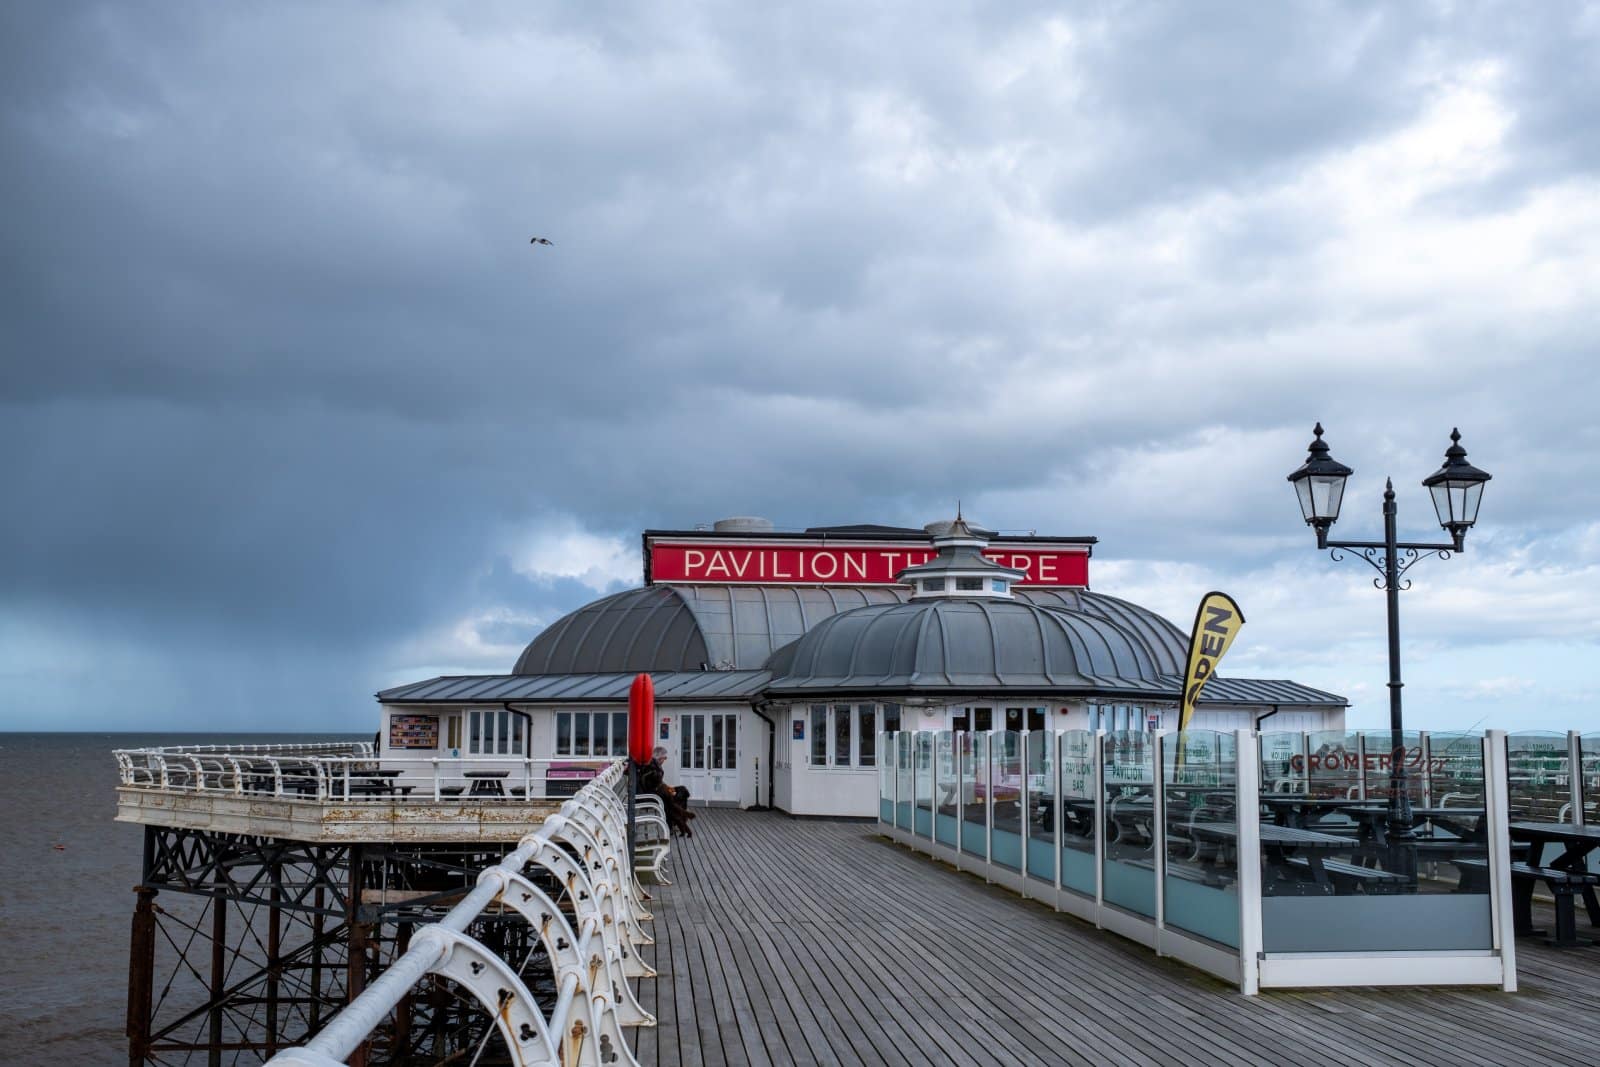 Image Credit: Shutterstock / yackers1 <p>Cromer’s Victorian pier and crab fishing heritage offer a quintessential British seaside experience. However, the North Sea breeze means it’s rarely as warm as southern coastal spots.</p>